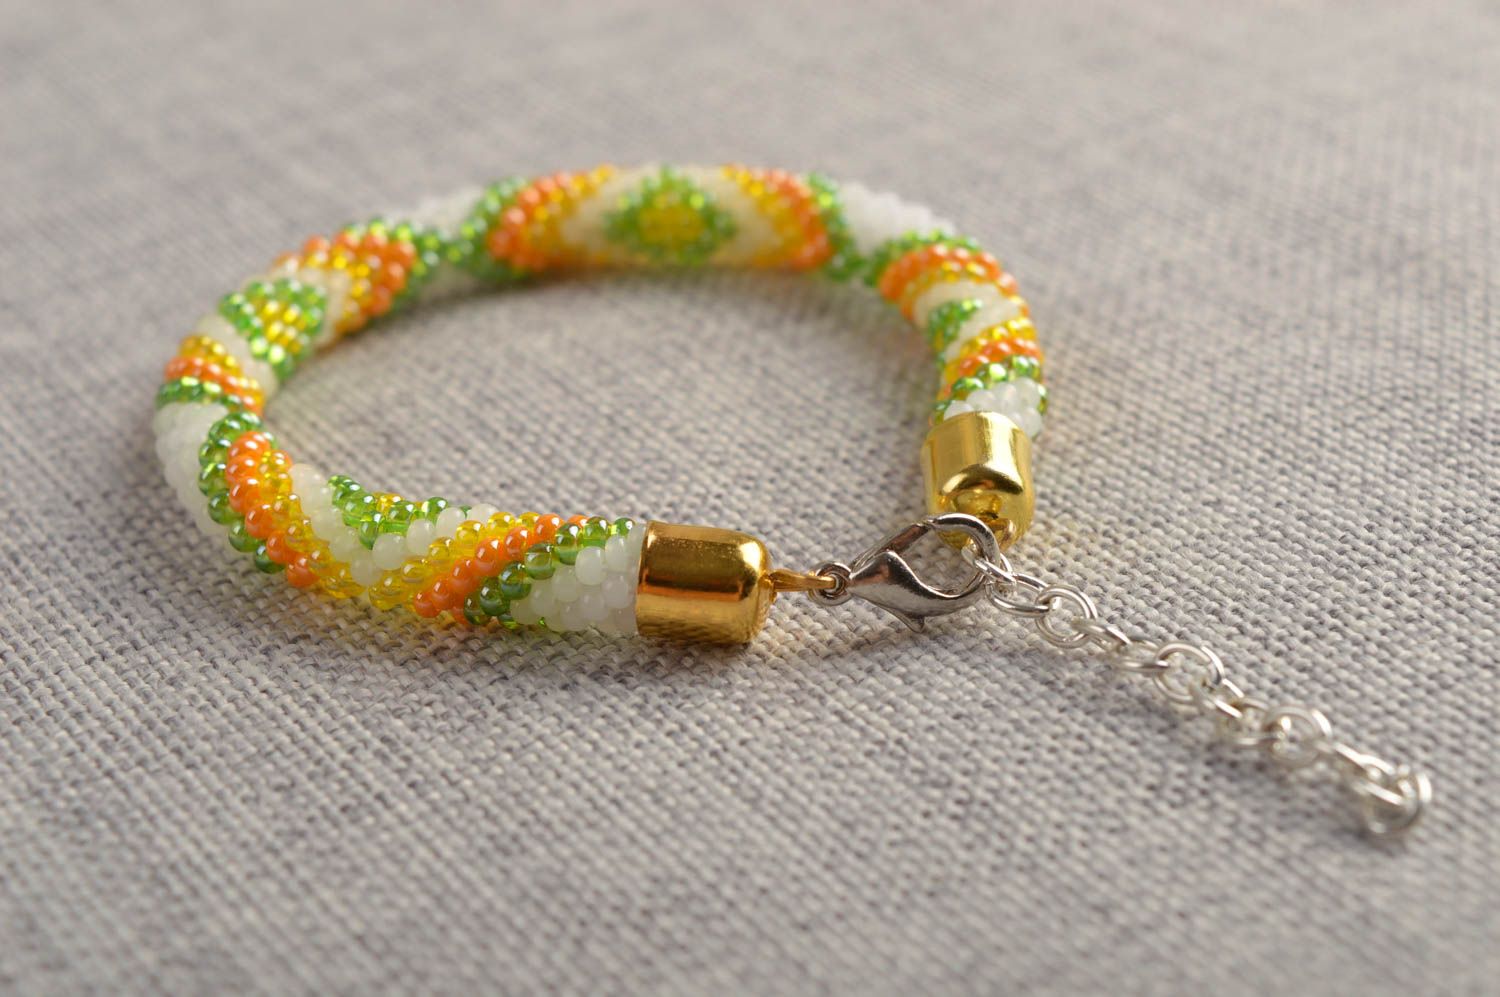 Beaded cord adjustable bracelet in light green, yellow and white color photo 1